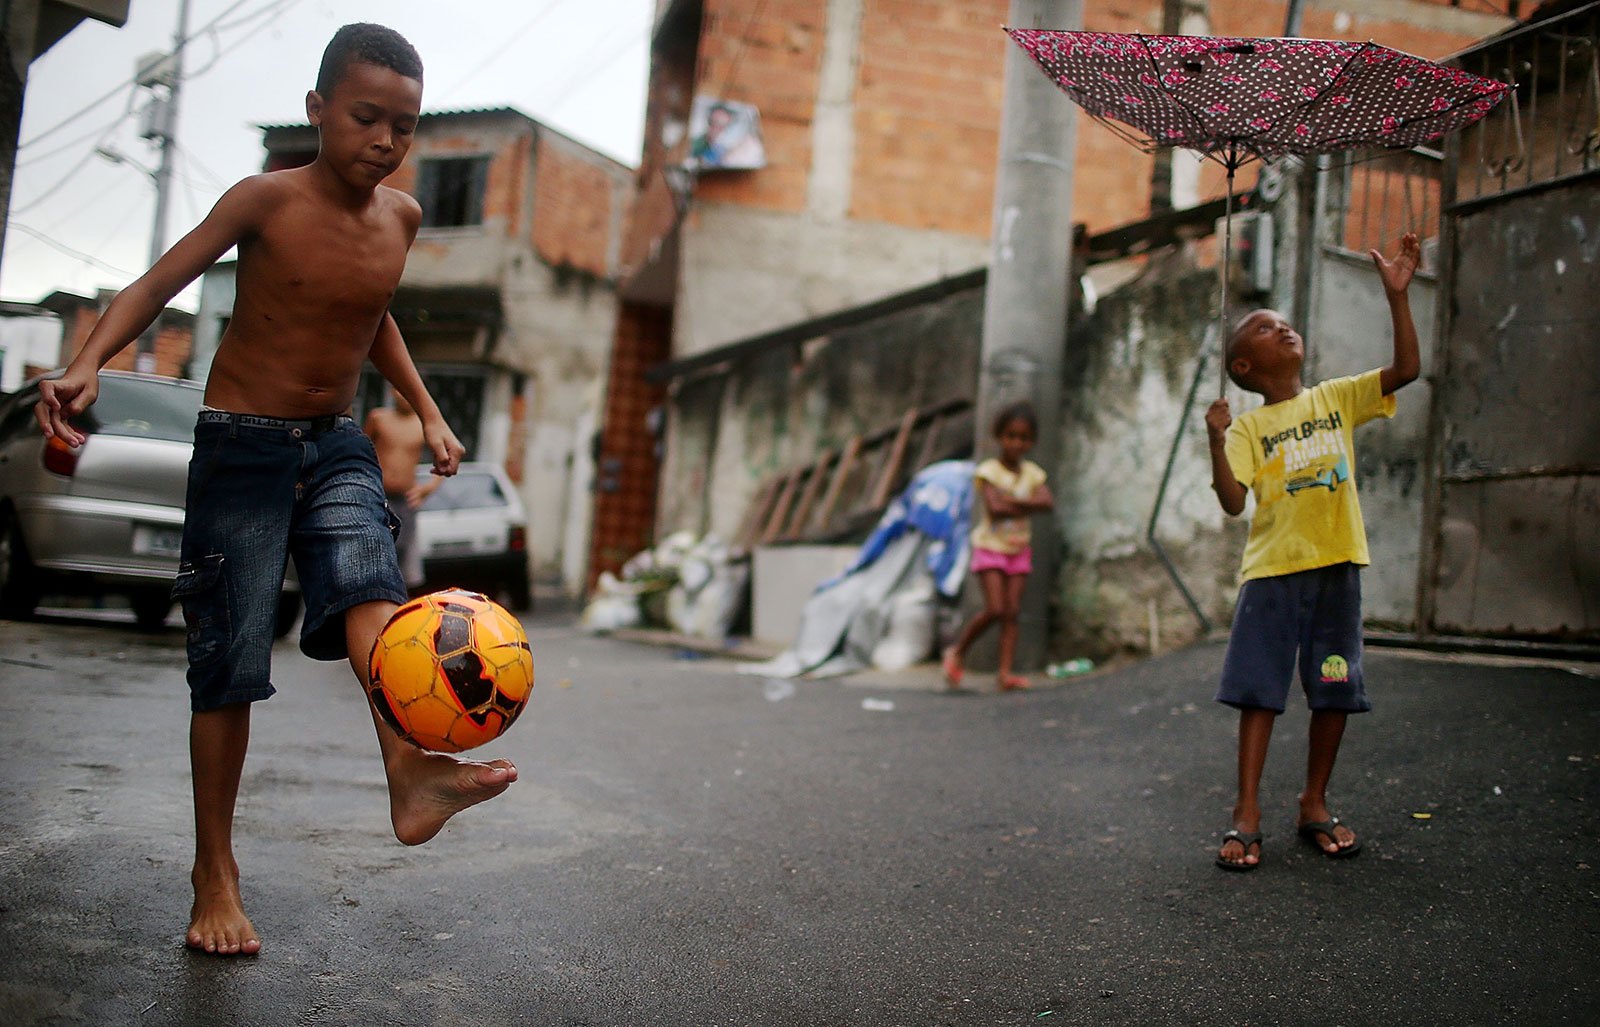 The Darker Side Of The World Cup